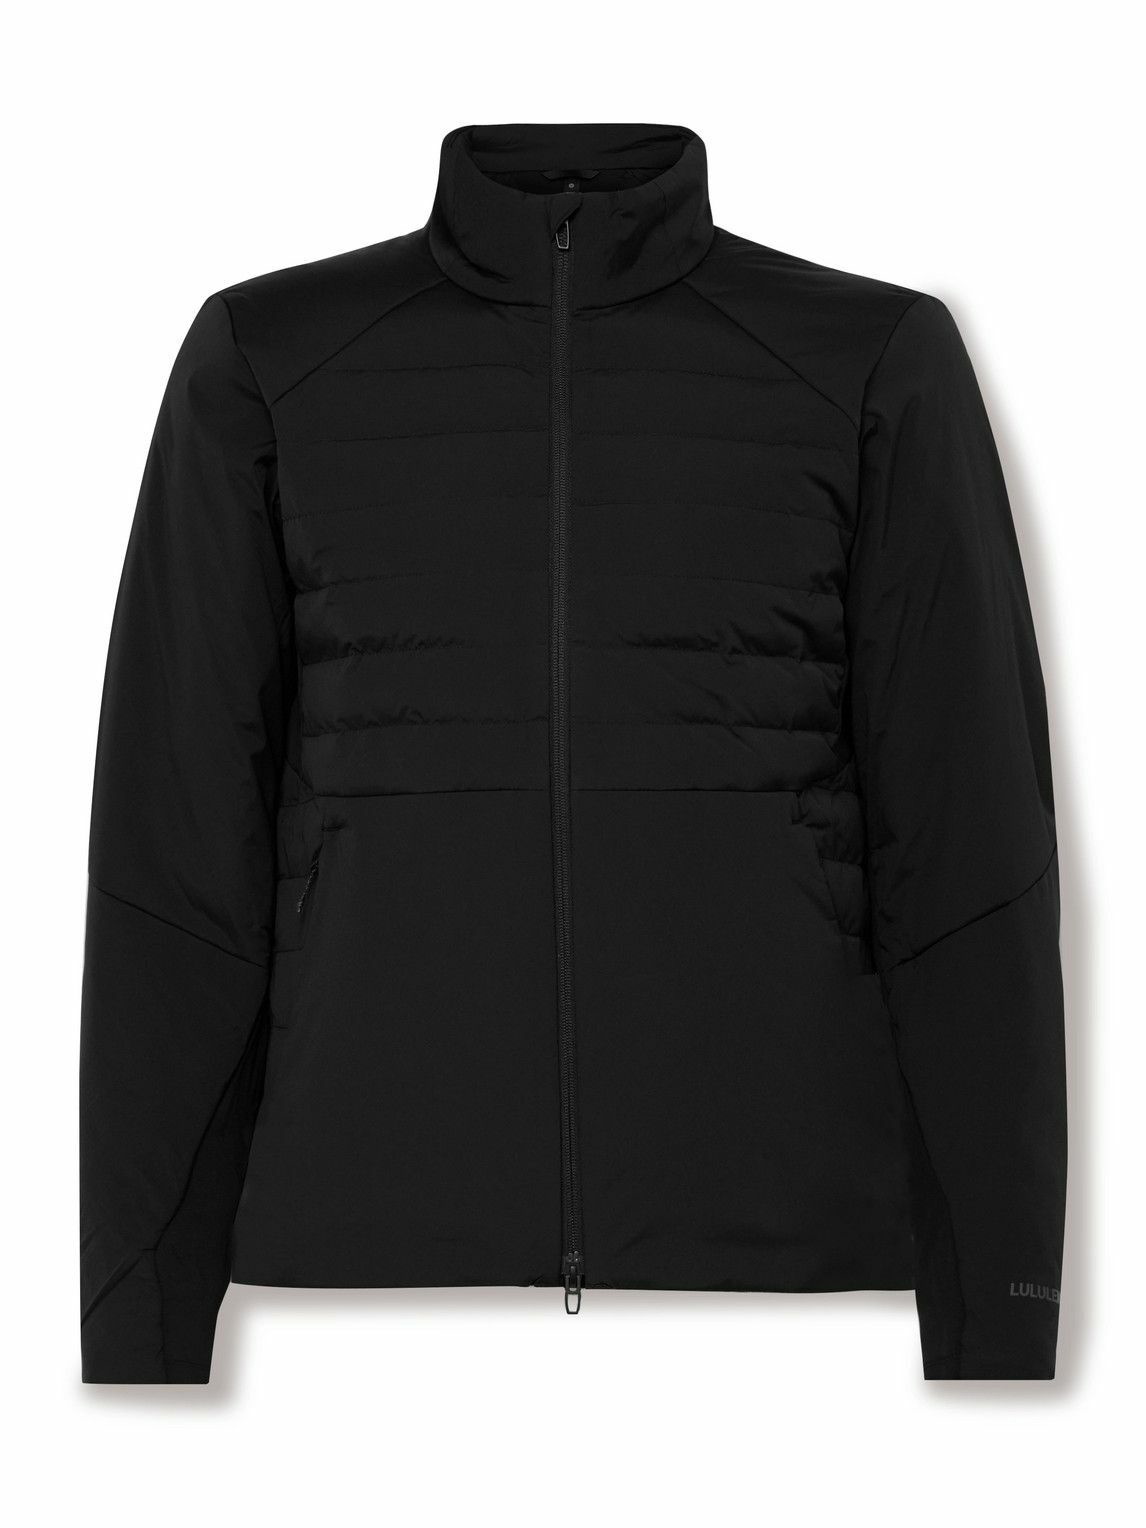 Lululemon + Down for It All Jacket